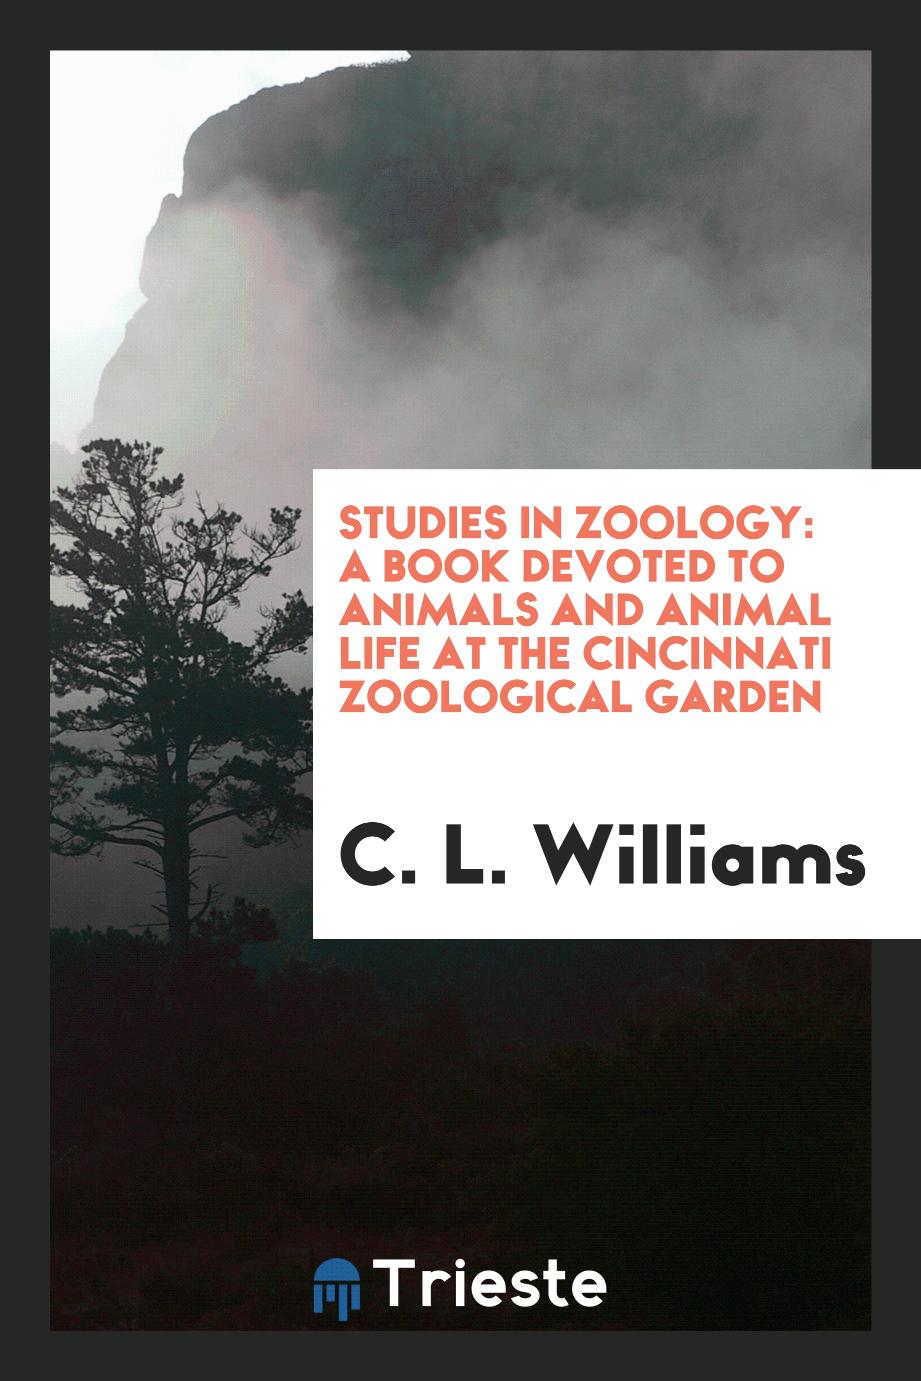 Studies in Zoology: A Book Devoted to Animals and Animal Life at the Cincinnati Zoological Garden